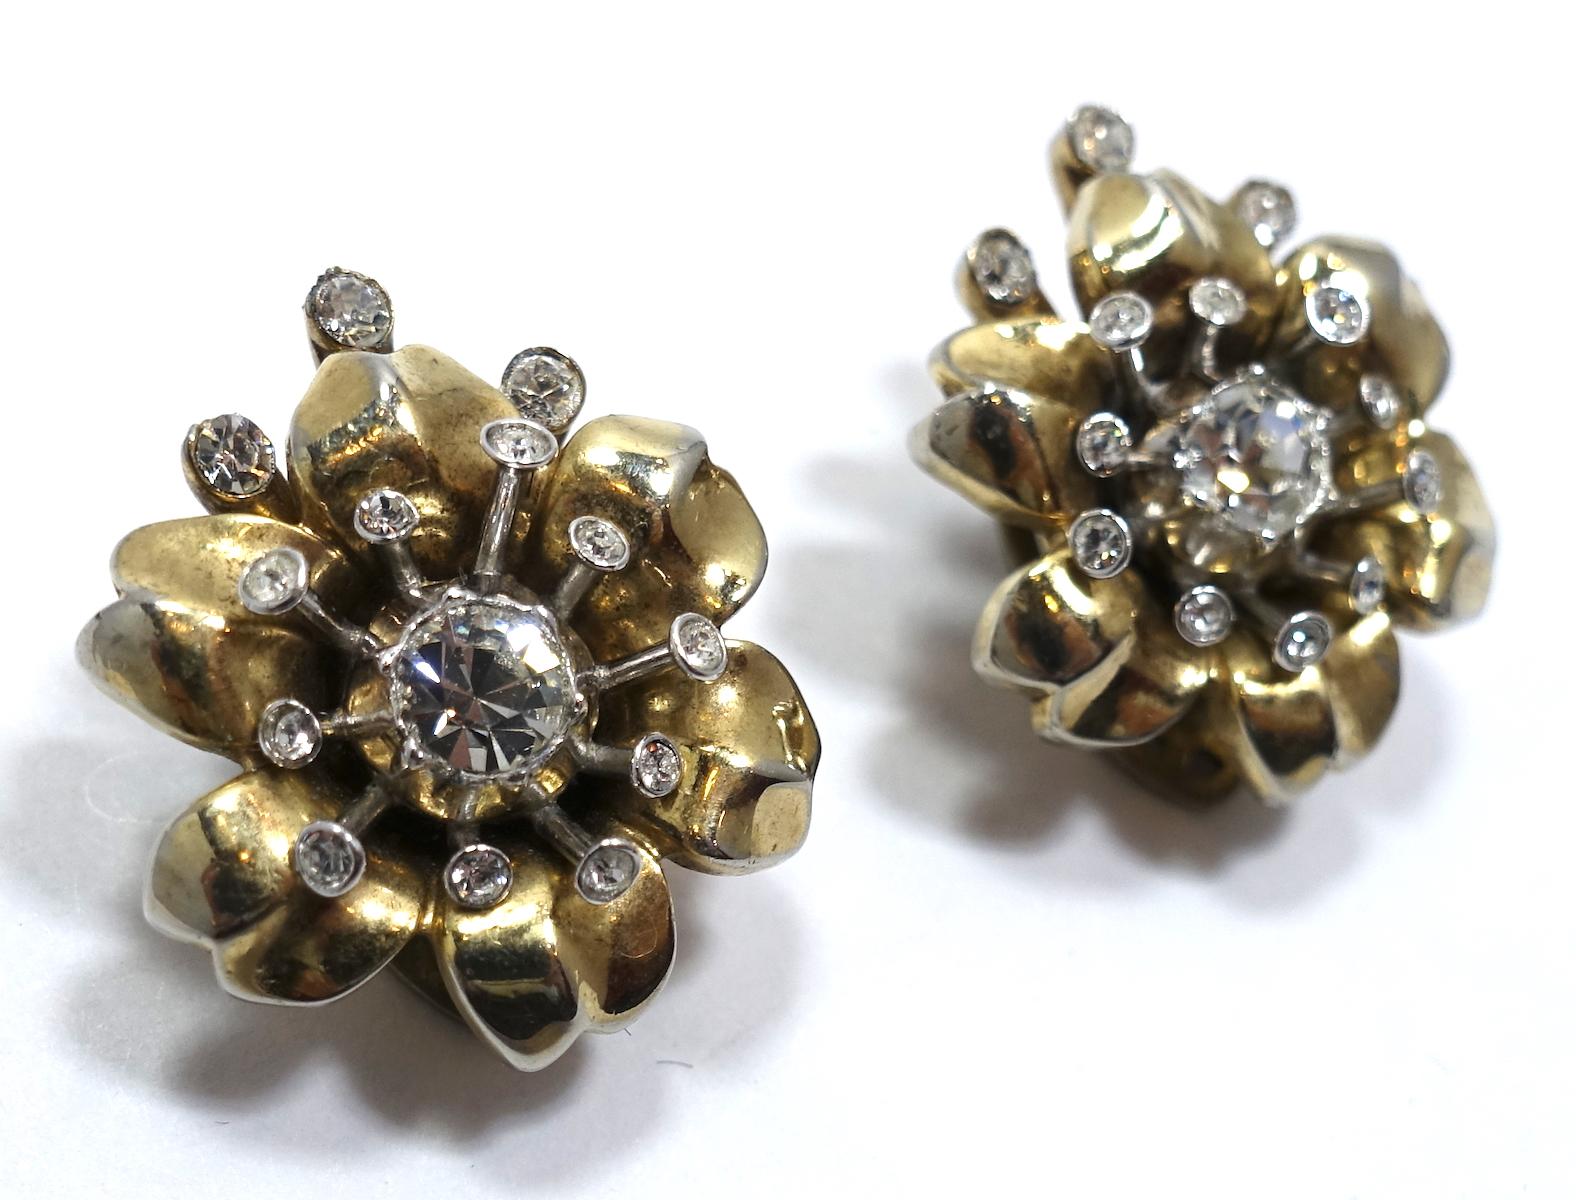 These vintage signed Trifari earrings feature clear rhinestones in a gold tone setting.  In excellent condition, these clip earrings measure 1” x 7/8” and are signed “Trifari”.